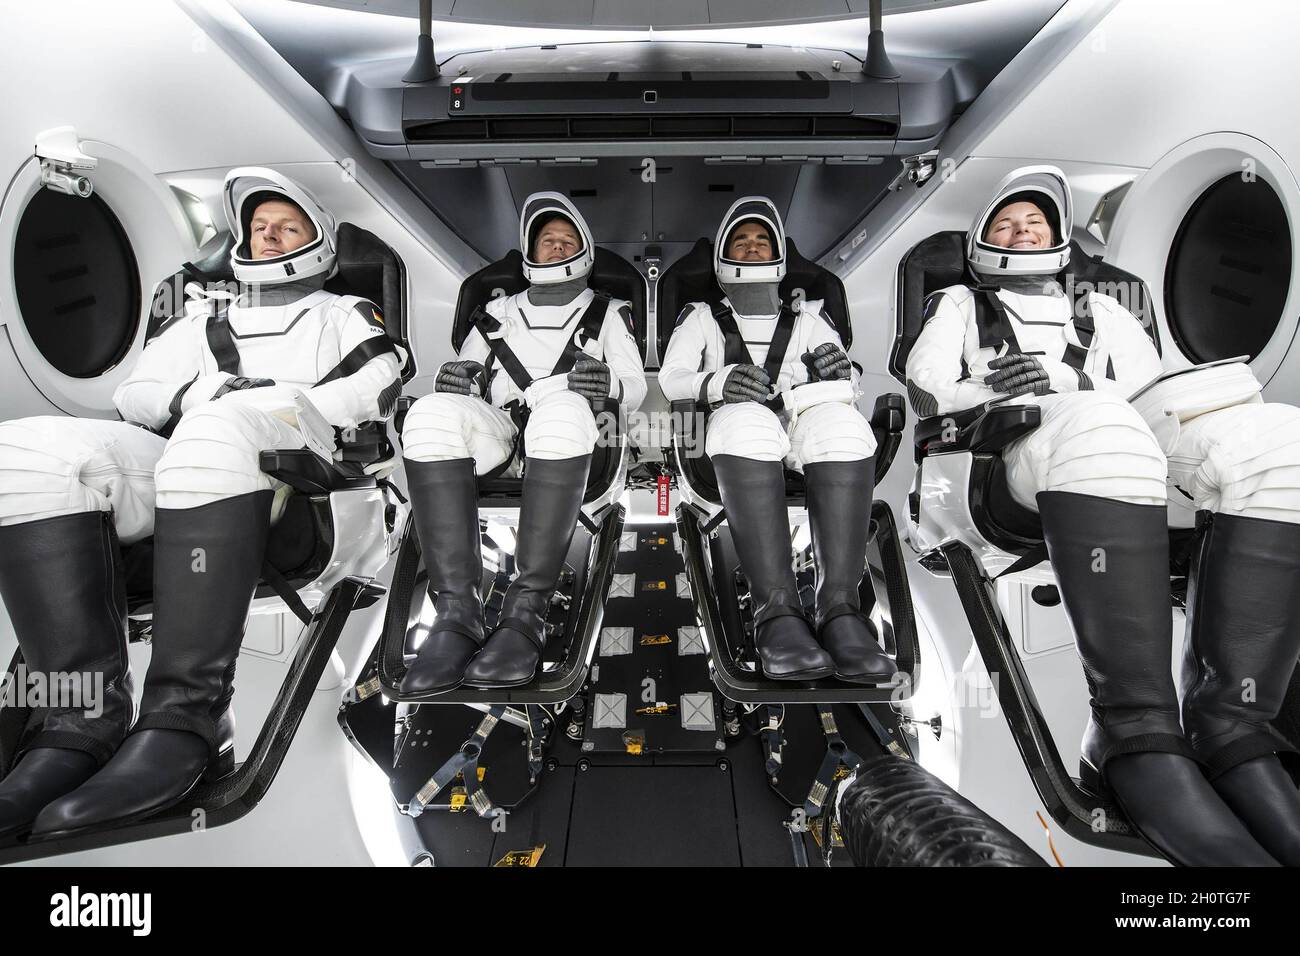 Hawthorne, United States. 14th Oct, 2021. The astronauts of SpaceX Crew-3 pose for a portrait in their suits during a training session inside the SpaceX Crew Dragon spacecraft on October 9, 2021. From left are ESA (European Space Agency) astronaut Matthias Maurer and NASA astronauts Raja Chari, Thomas Marshburn, and Kayla Barron. Chari is Commander, Marshburn is the Pilot, and Barron and Maurer are both Mission Specialists. Photo by SpaceX/UPI Credit: UPI/Alamy Live News Stock Photo